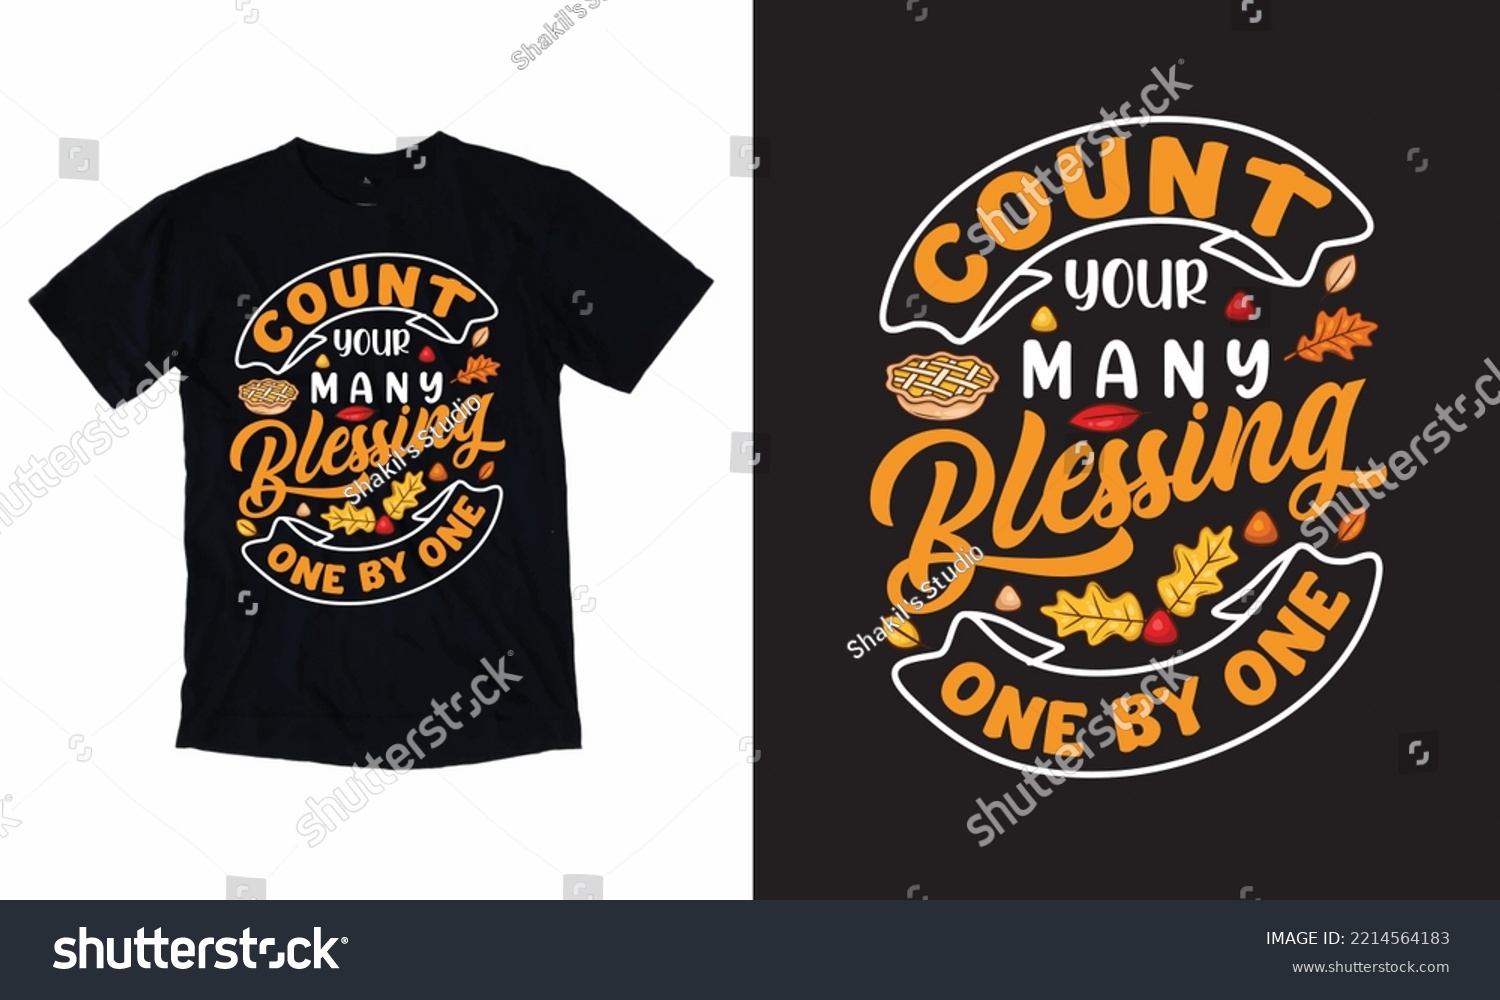 SVG of Count Your Many Blessing One By One - Thanksgiving T-shirt design, vector, Apple Pie, Leaf, Typography T-shirt. svg